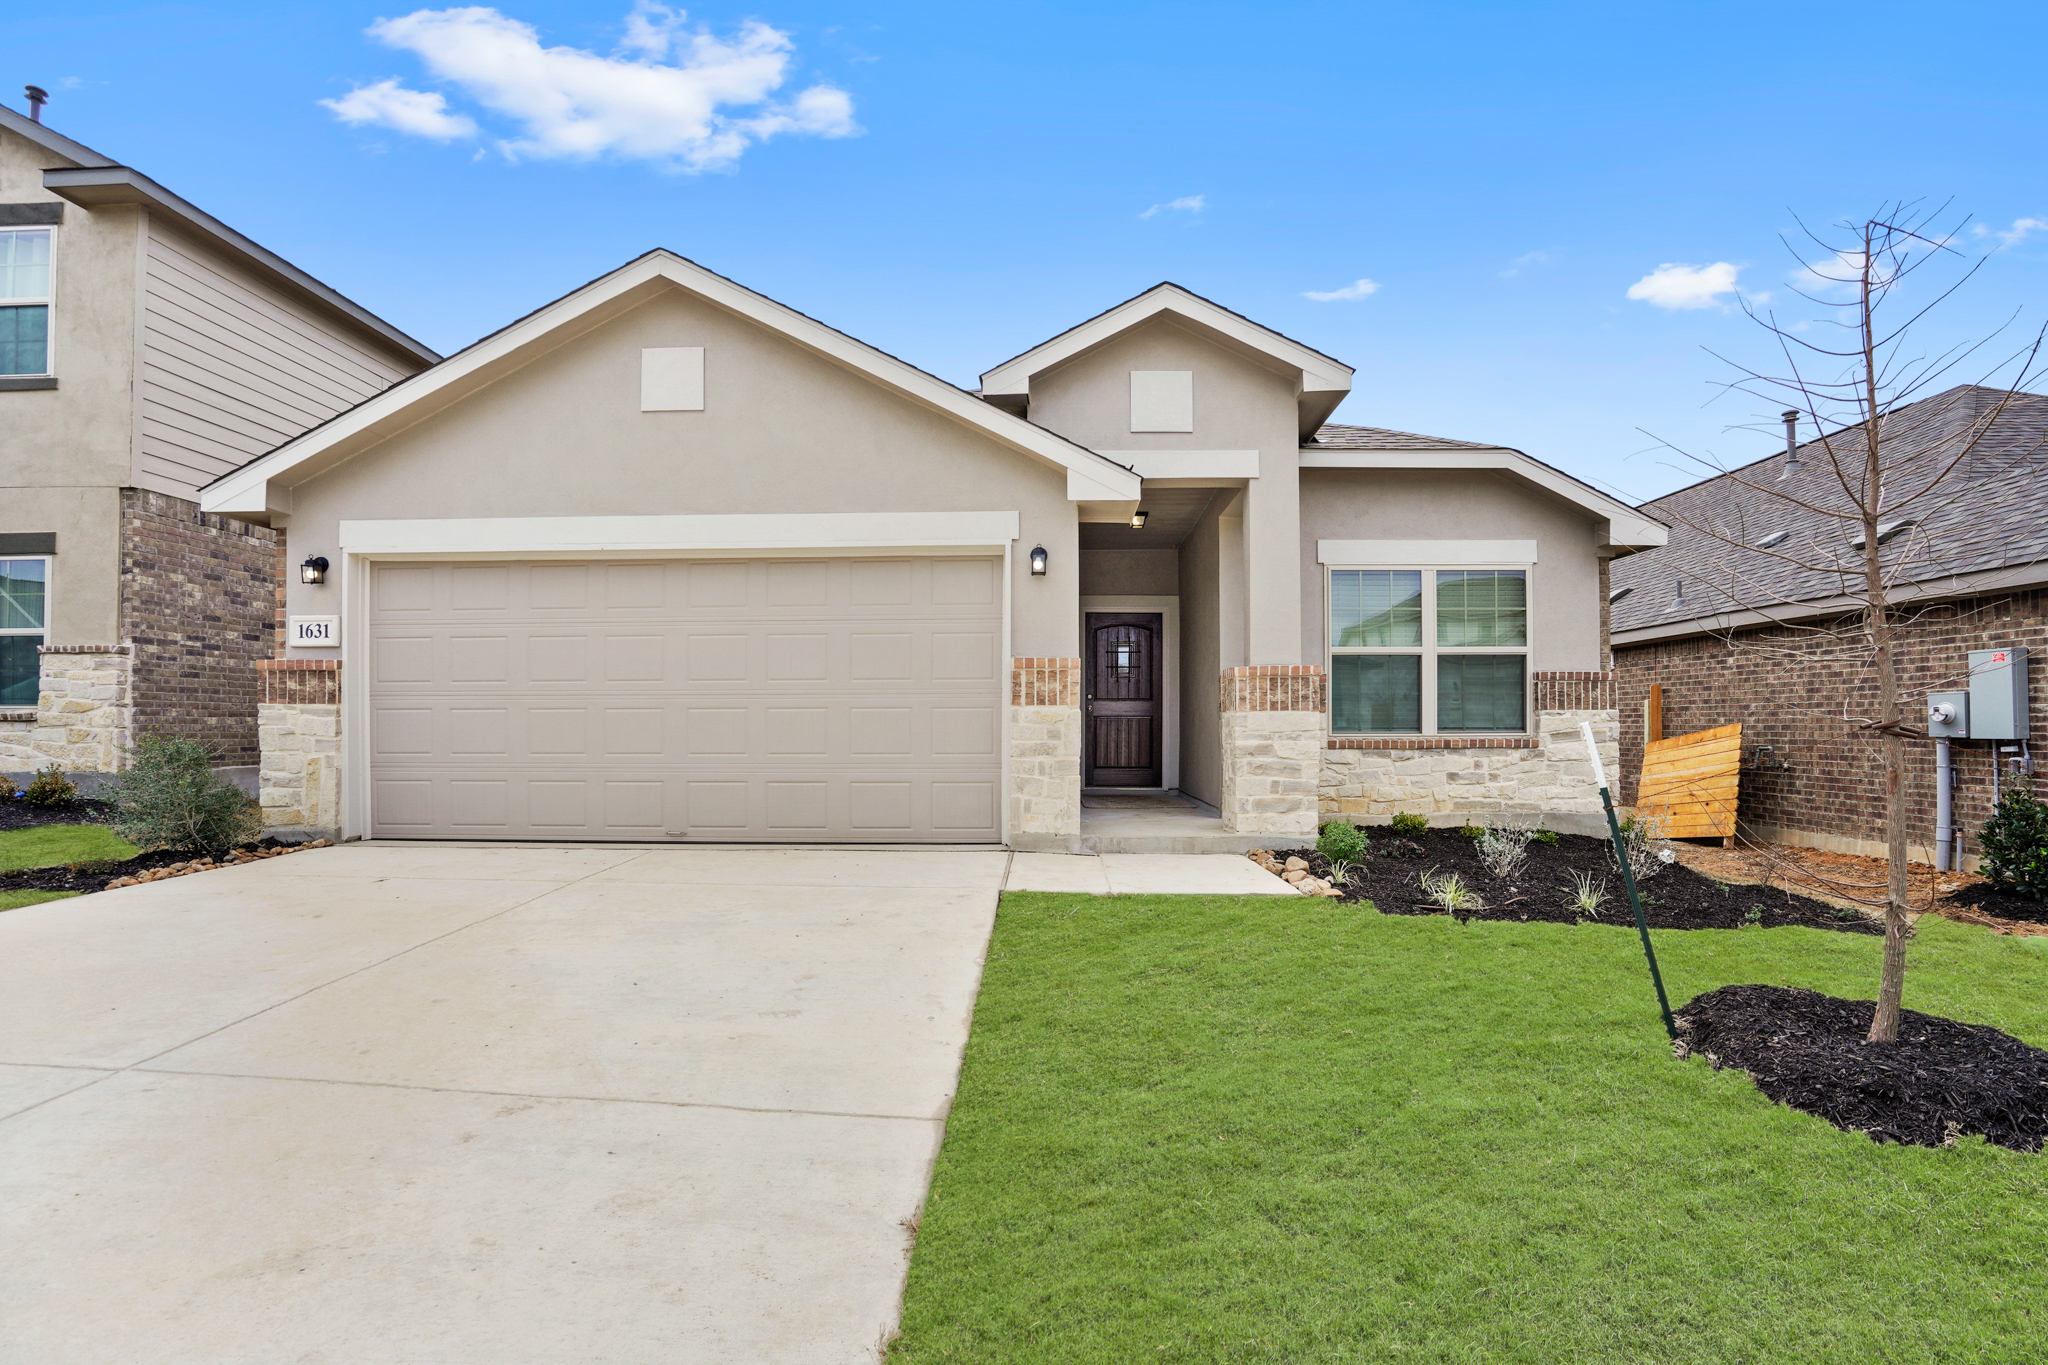 Front view of a new move-in ready home in Meyer Ranch with large garage